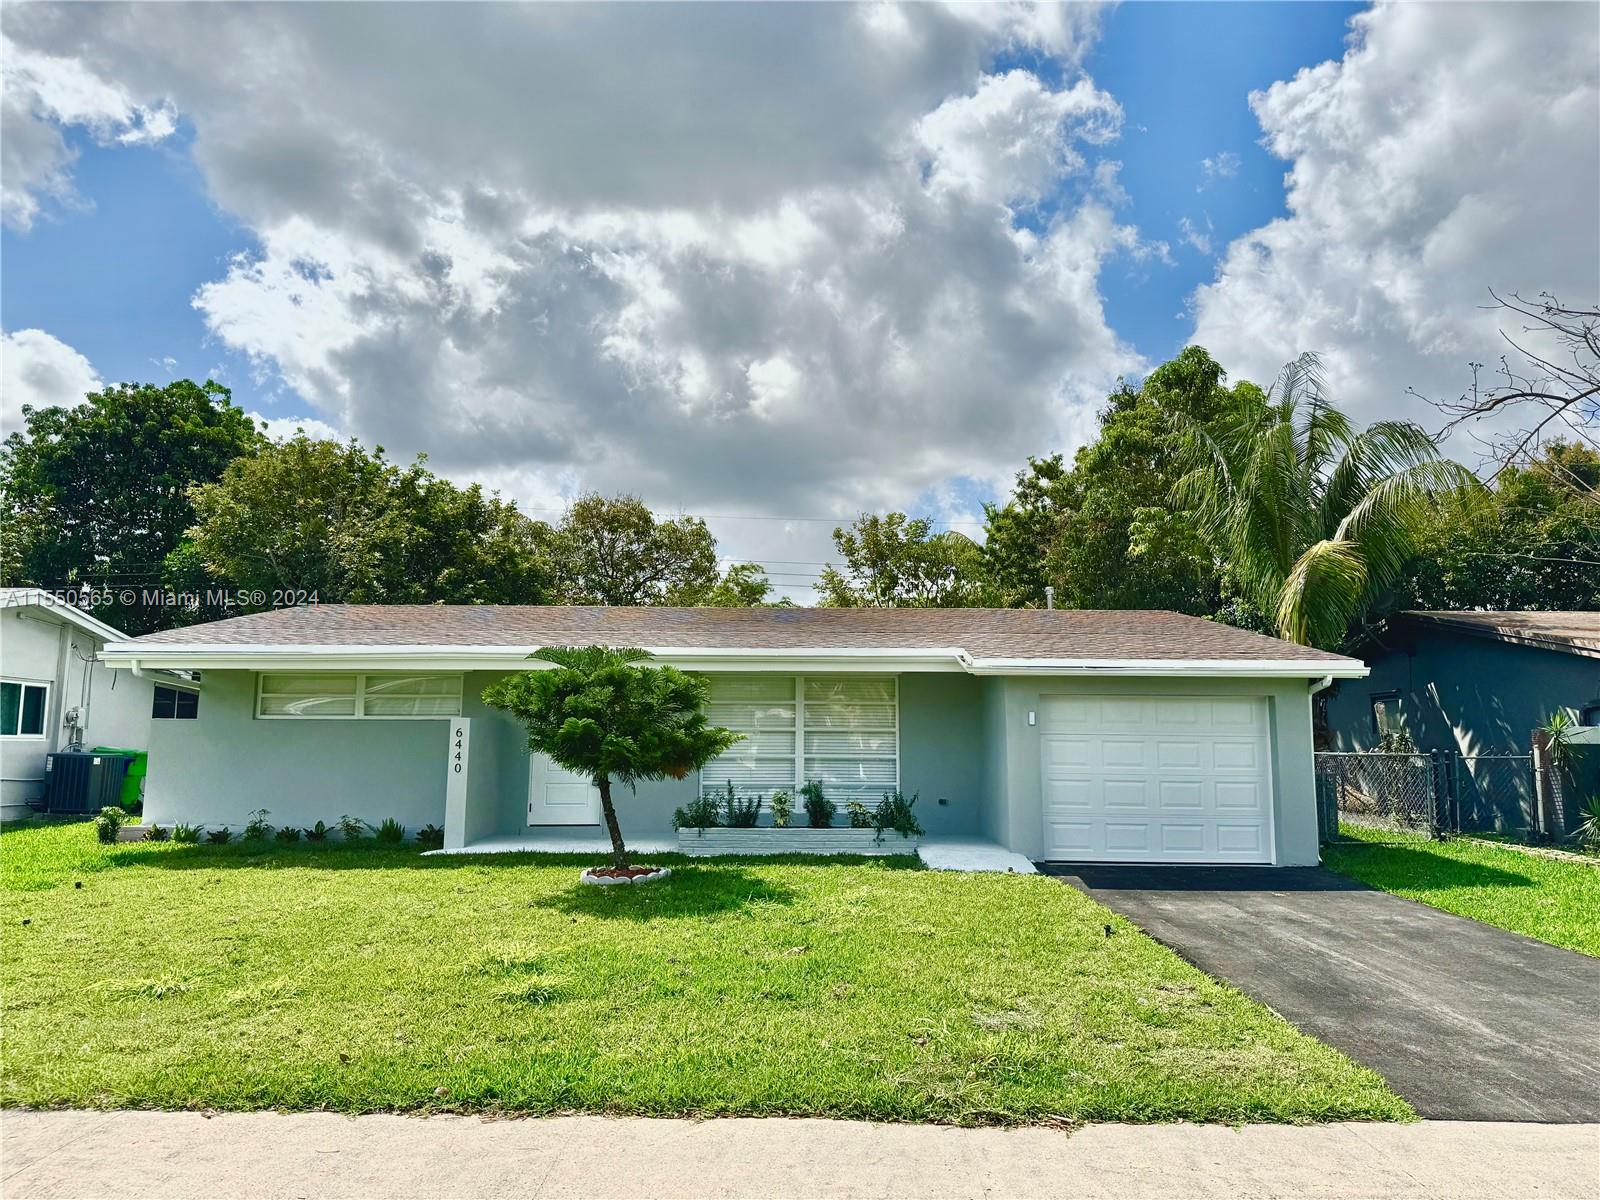 6440 Nw 30th St St, Sunrise, Miami-Dade County, Florida - 3 Bedrooms  
2 Bathrooms - 